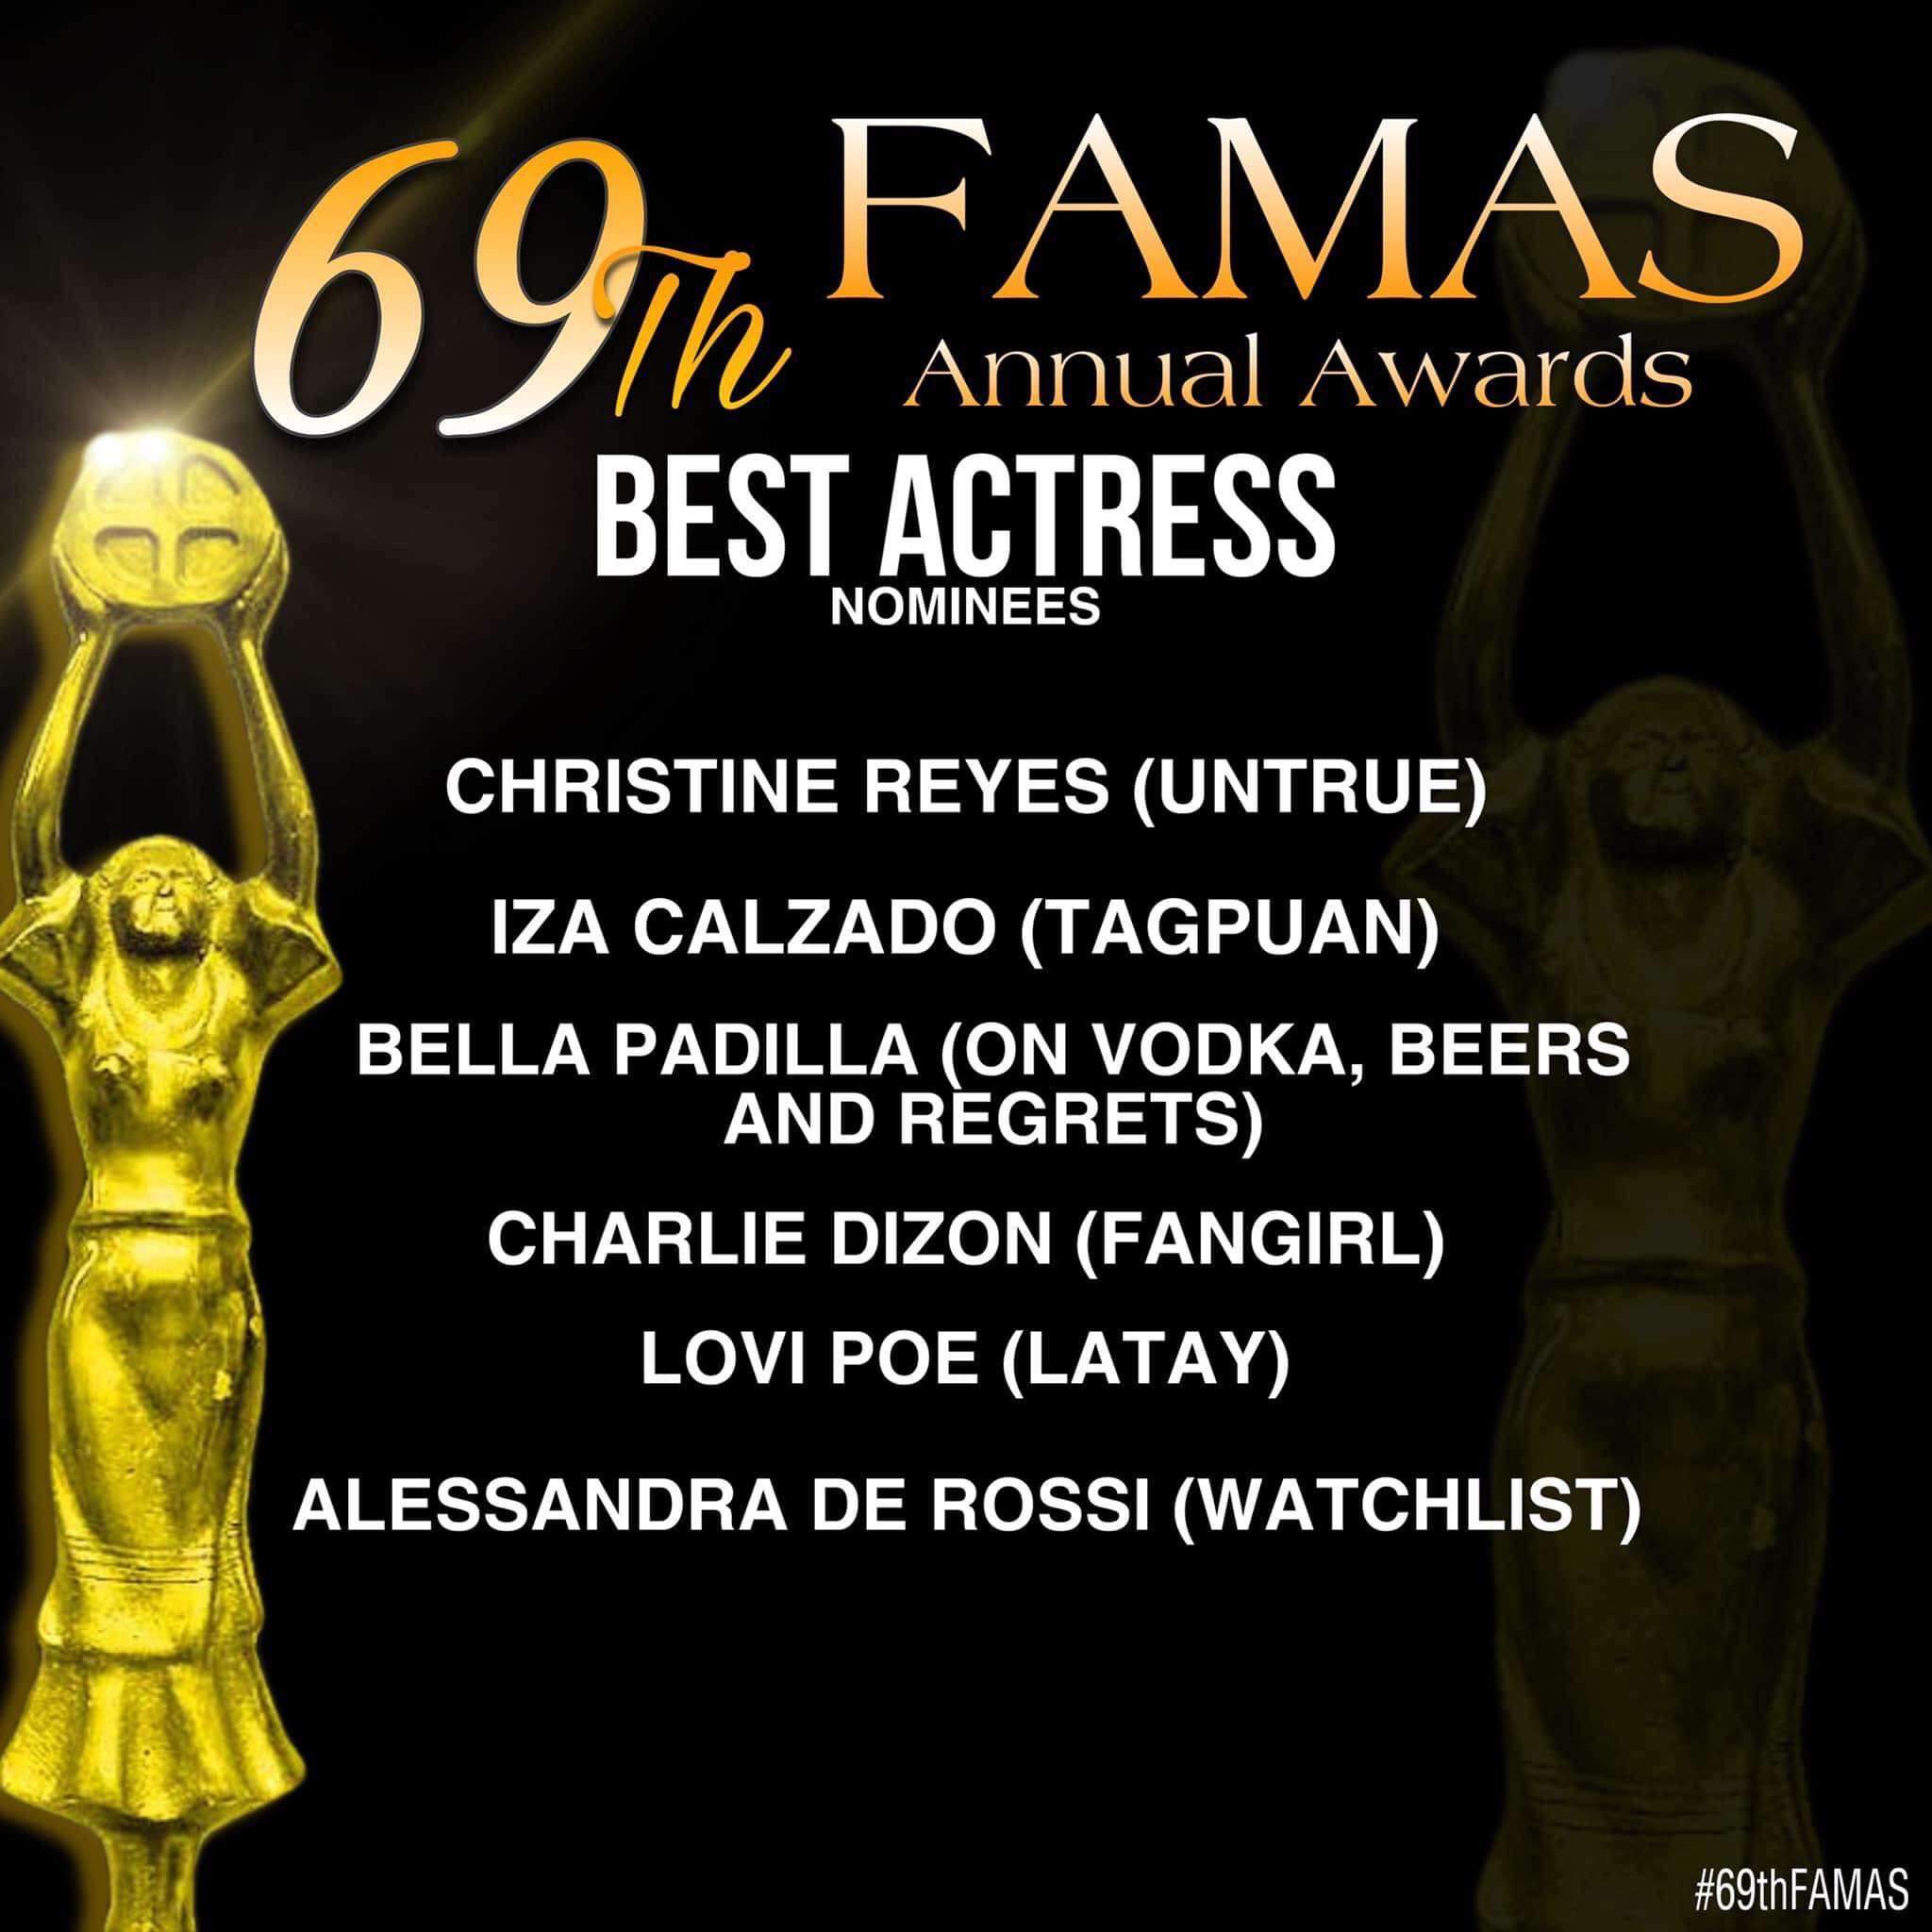 69th famas best actress